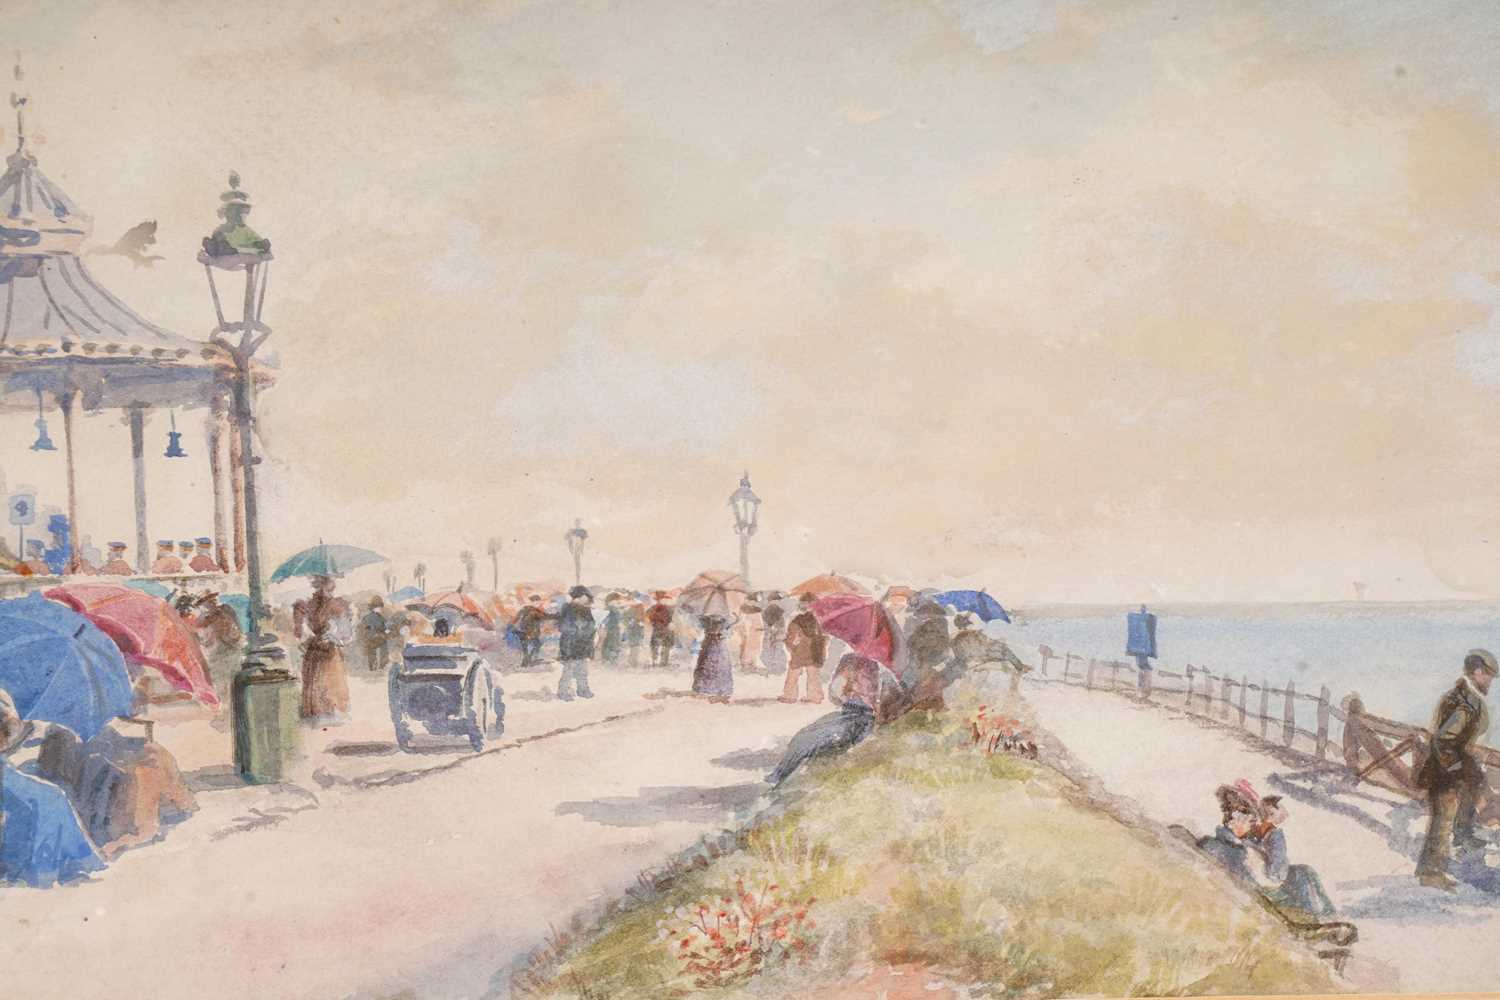 In the manner of John Strickland Goodall - Promenading at the Beach | watercolour - Image 5 of 5